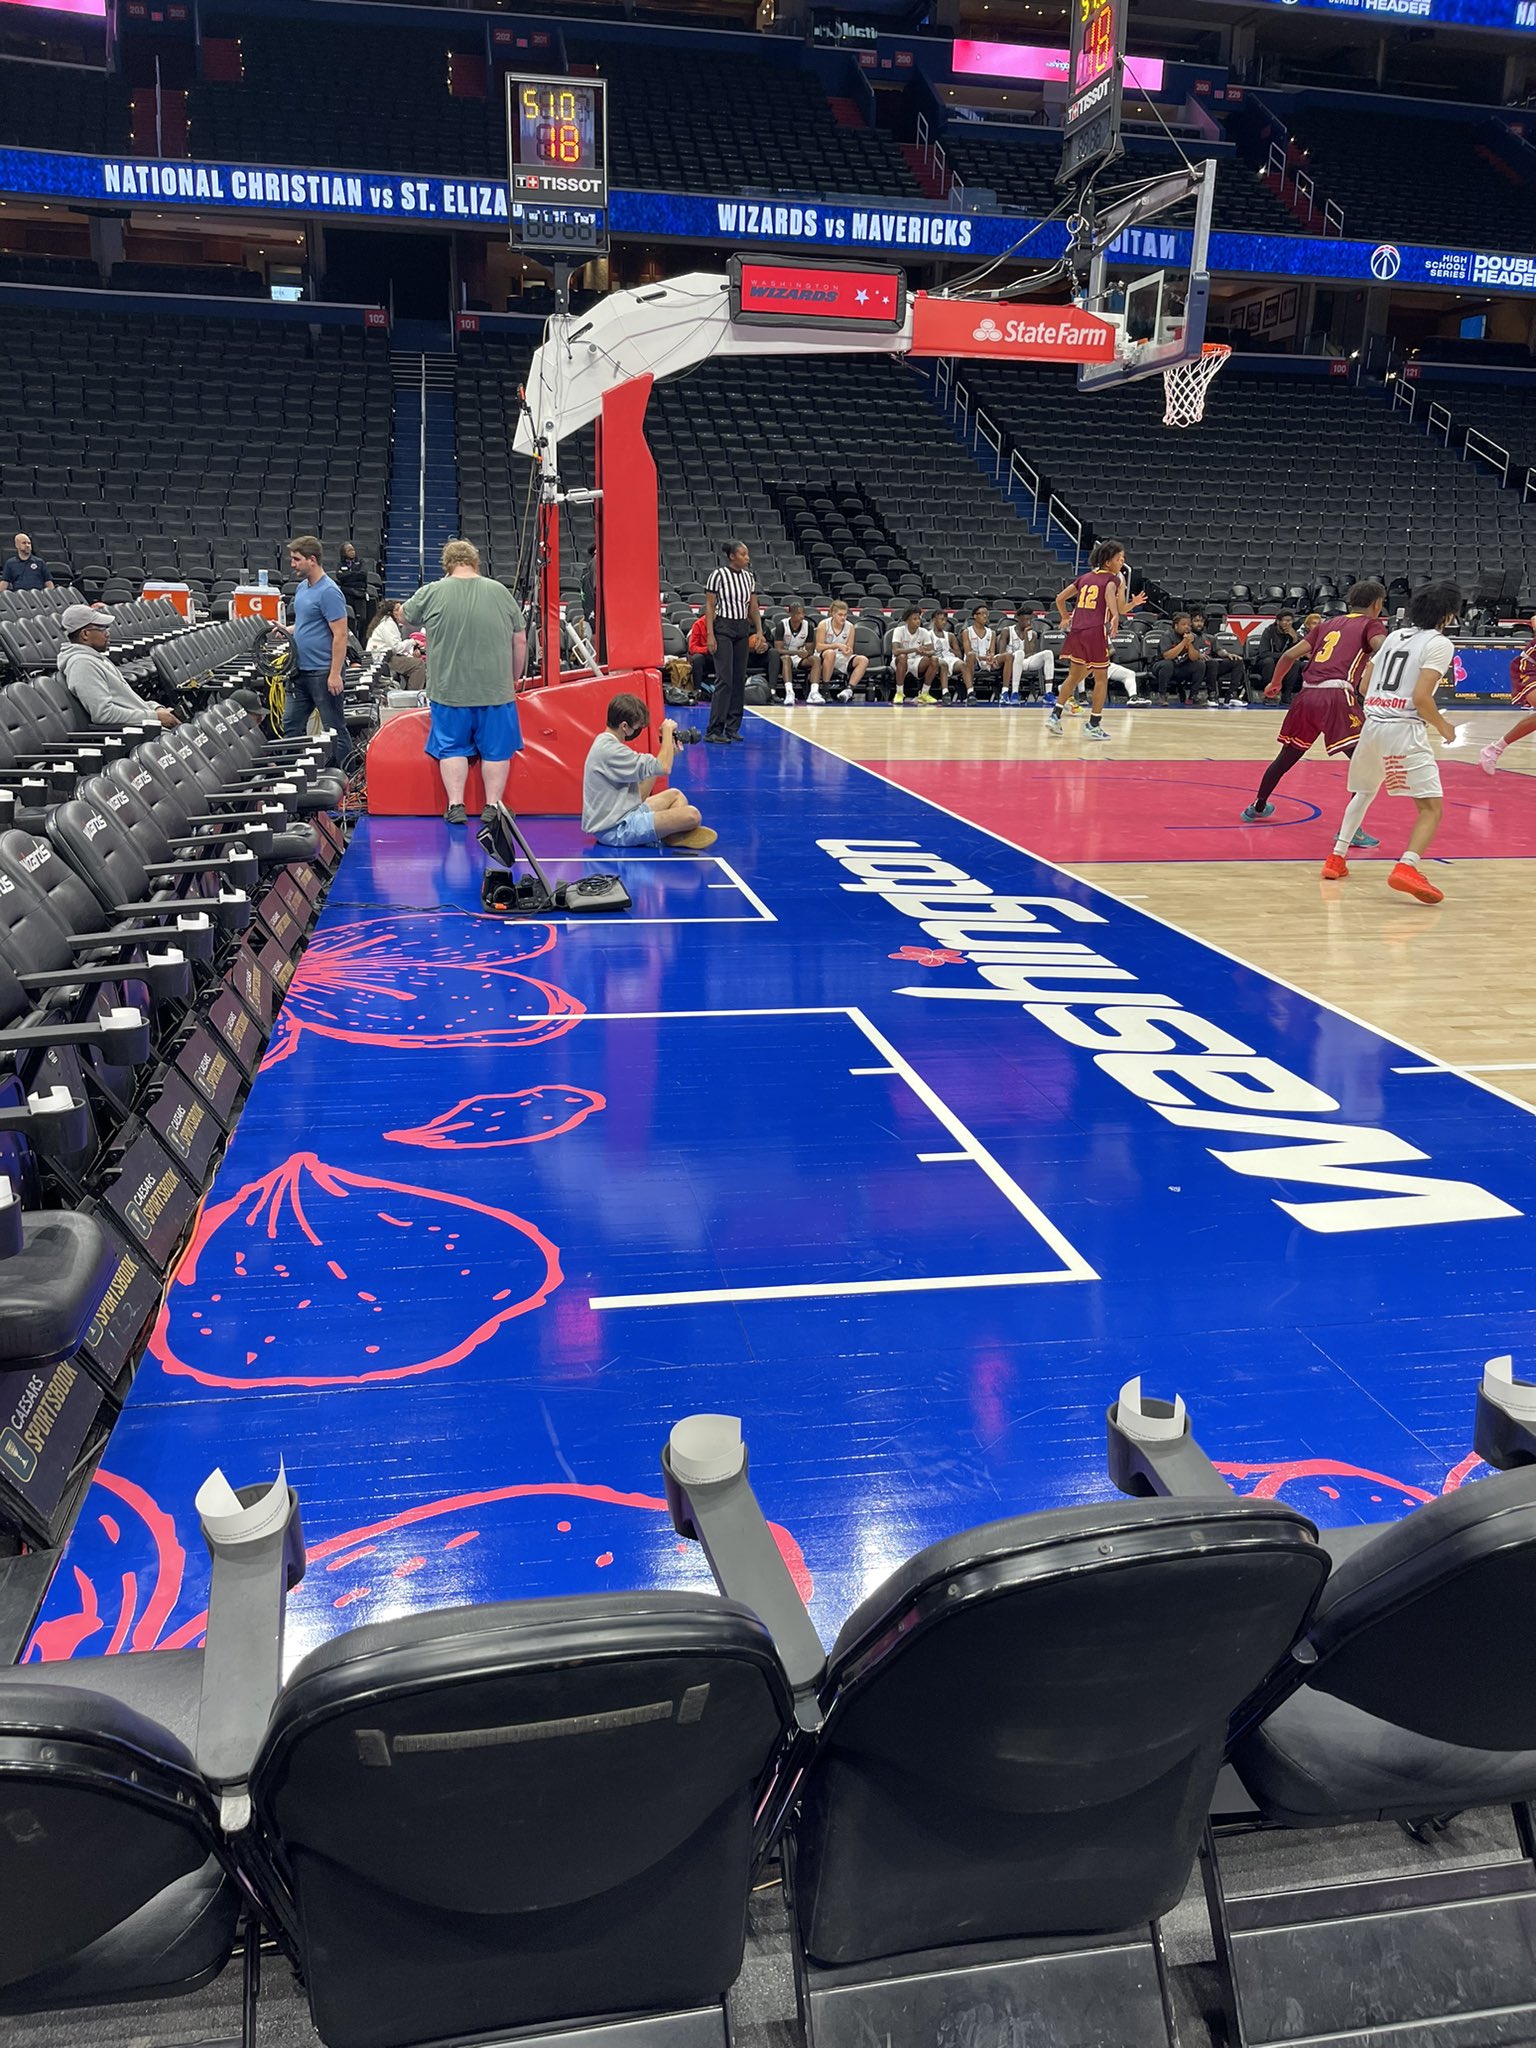 Josh Robbins on X: Here's a look at the Washington Wizards' new cherry  blossom-themed court, which will debut tonight when the team hosts the  Mavericks.  / X